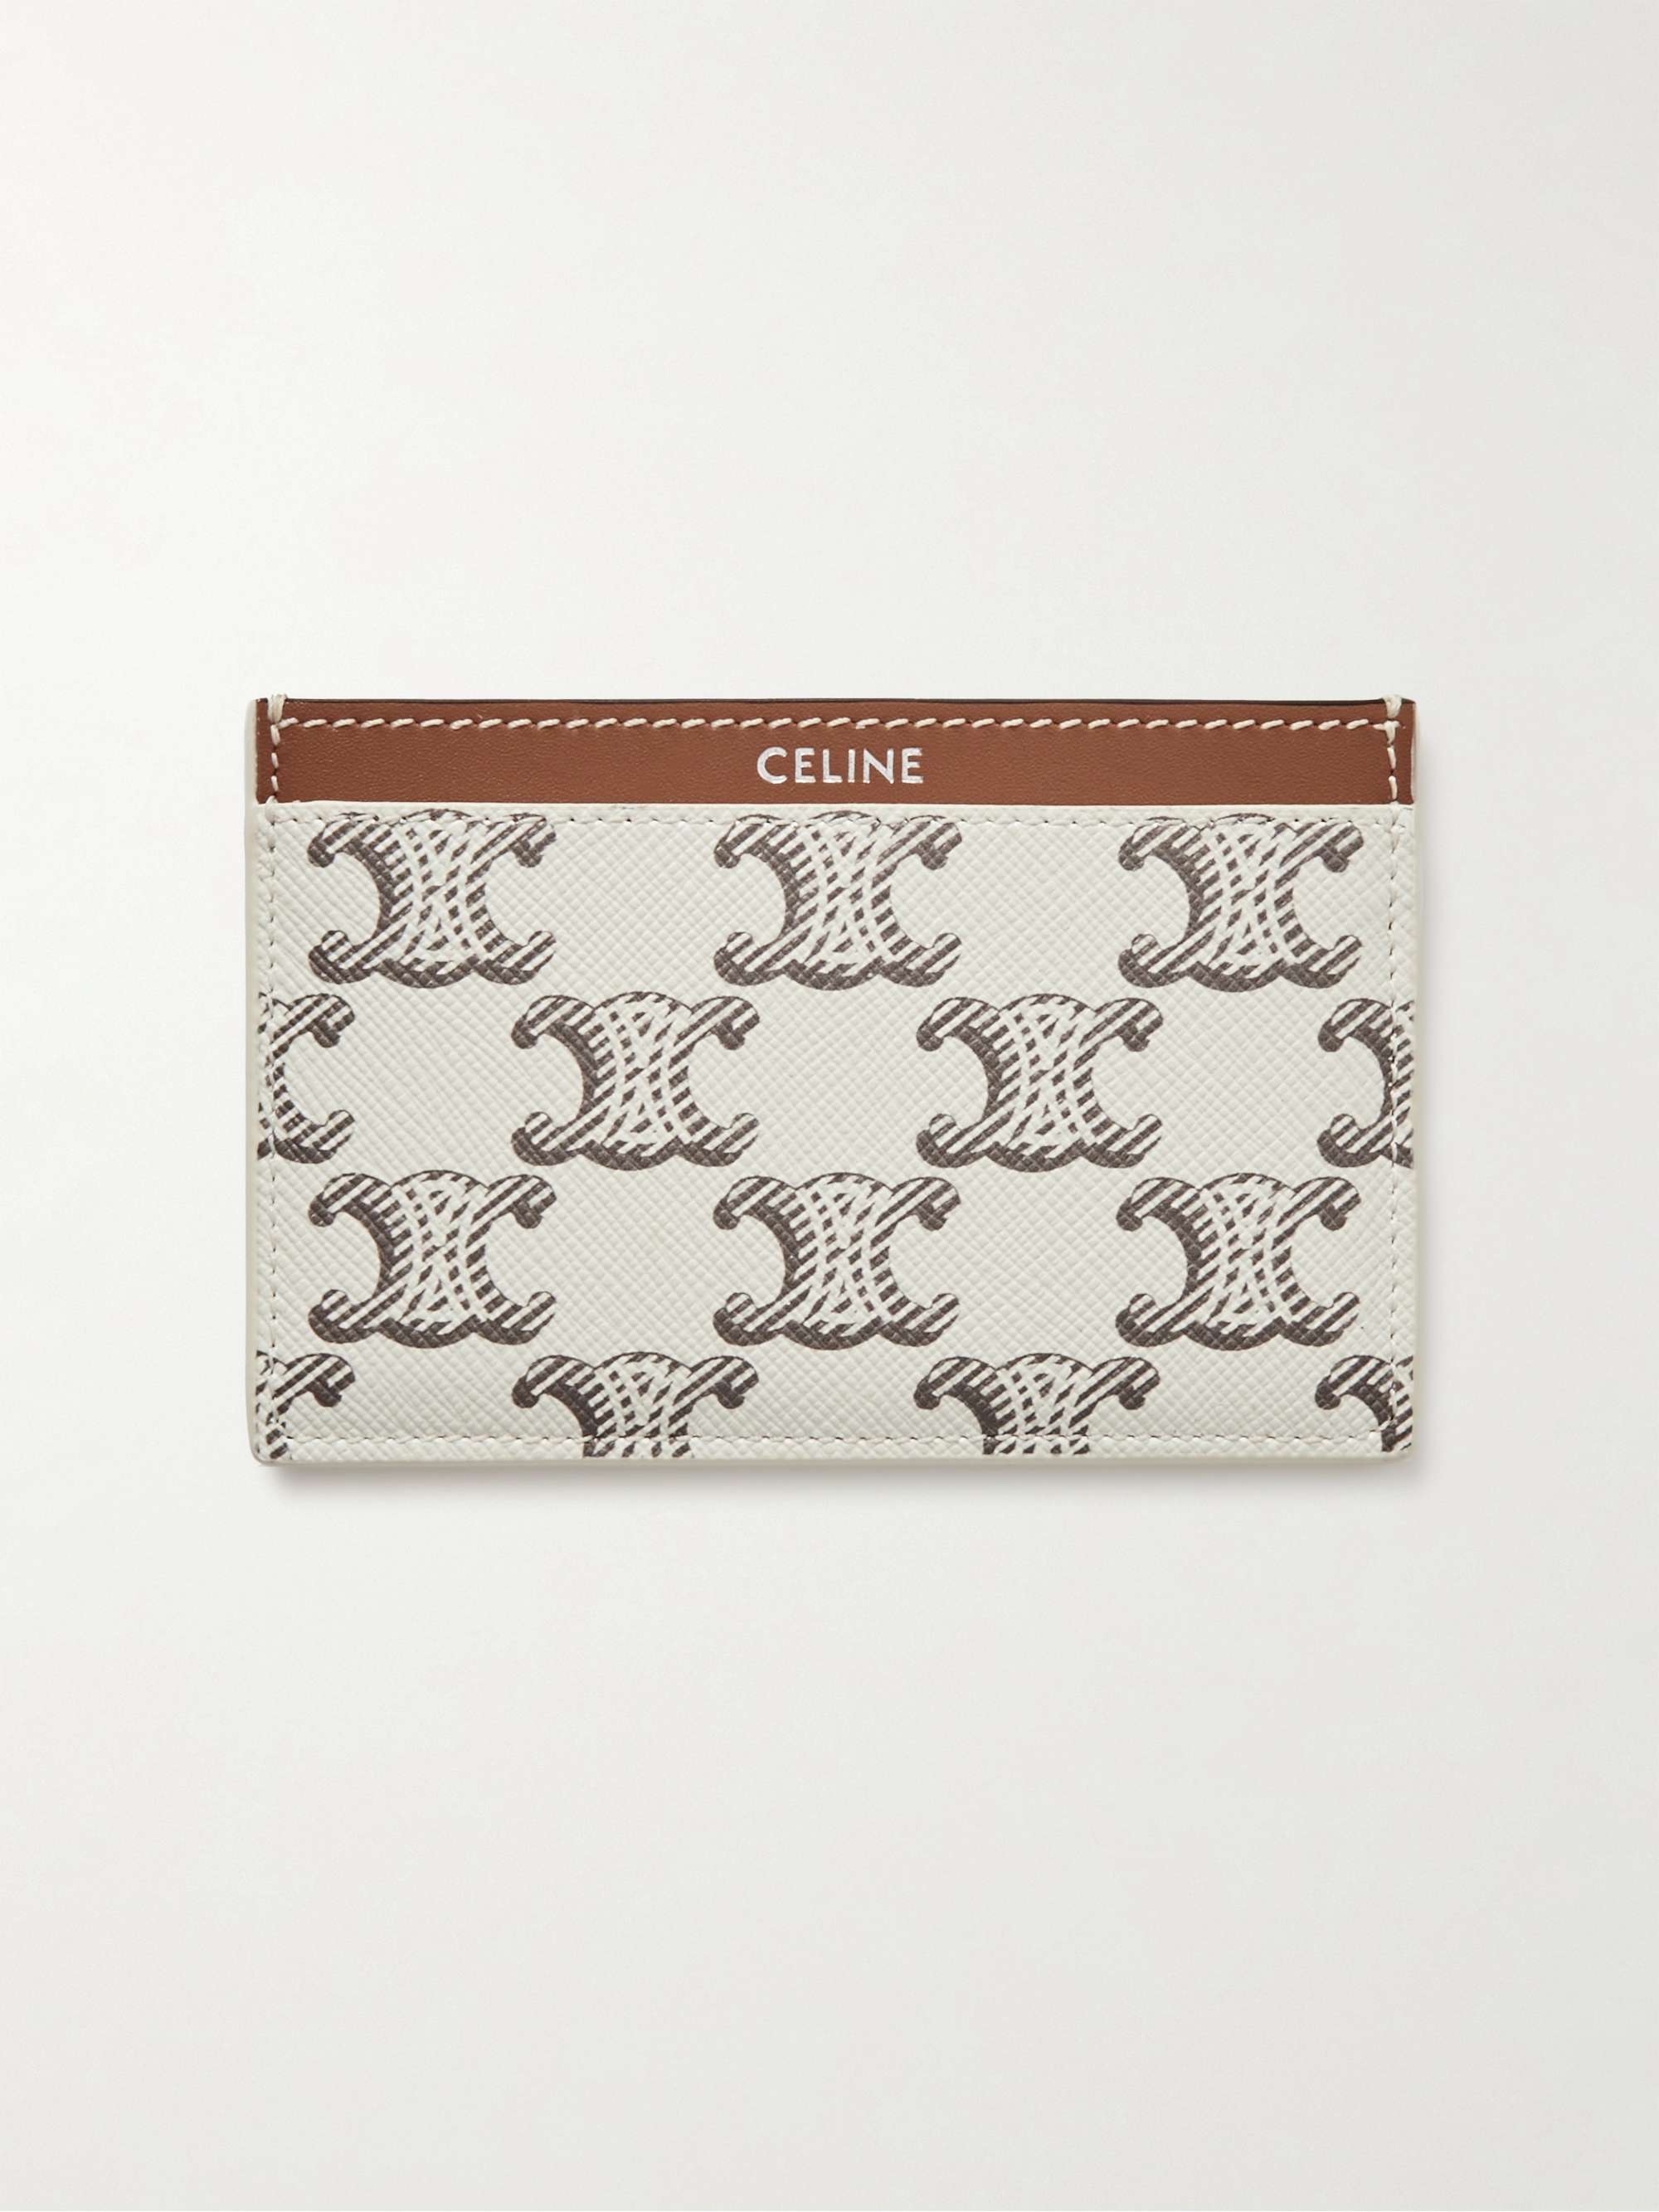 Triomphe Leather-Trimmed Coated-Canvas Cardholder